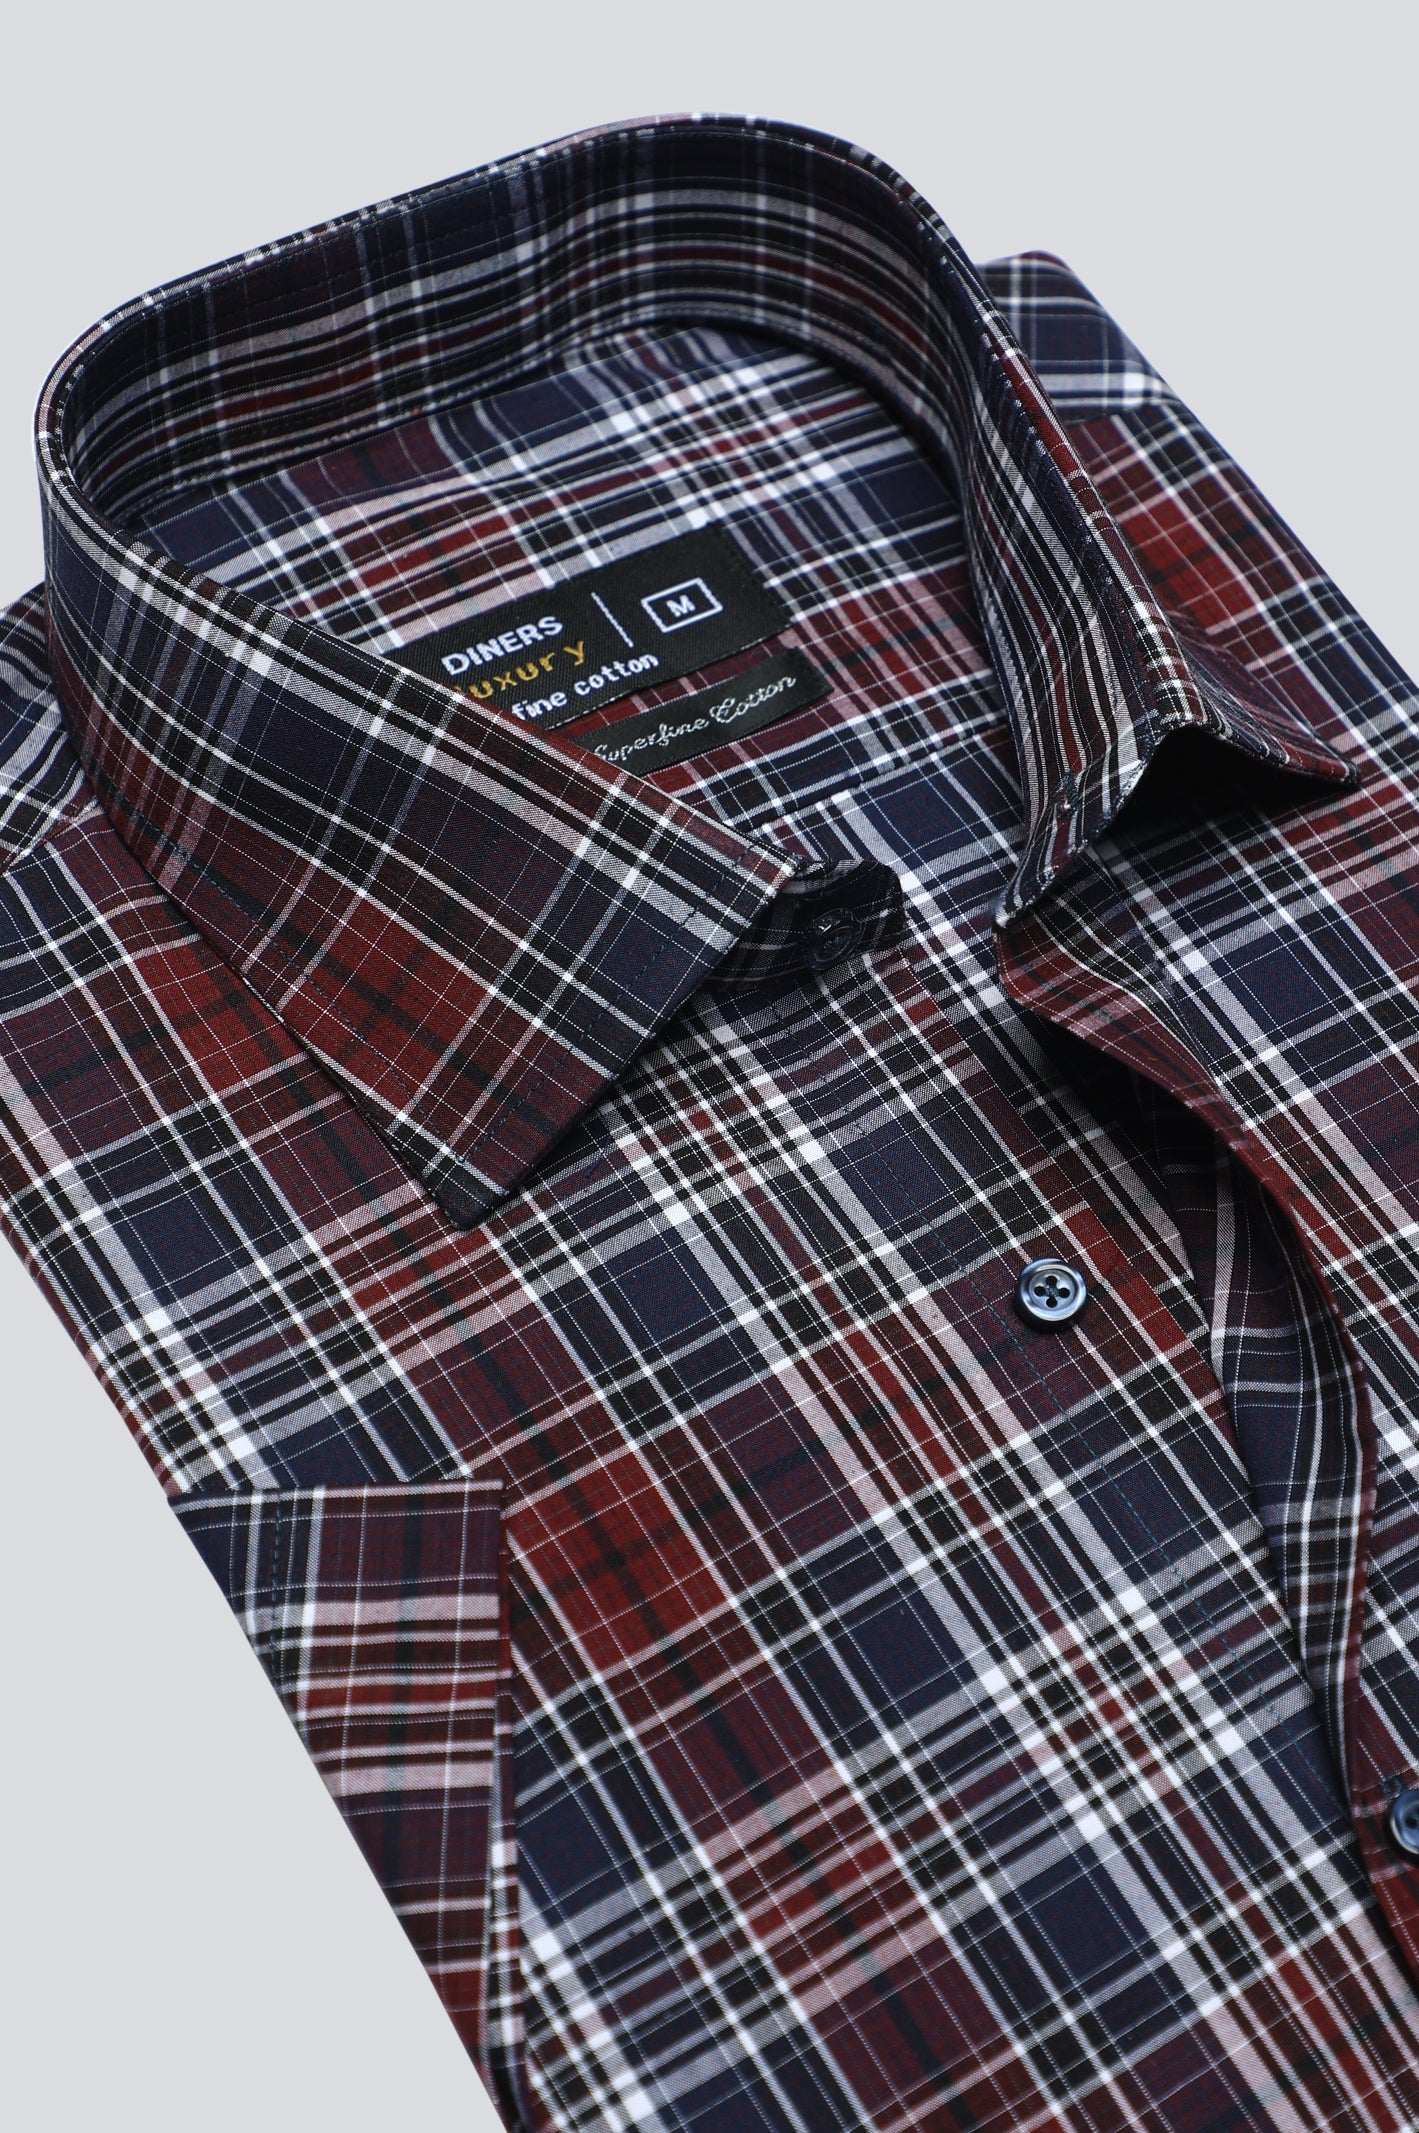 Multicolor Check Formal Shirt For Men - Diners